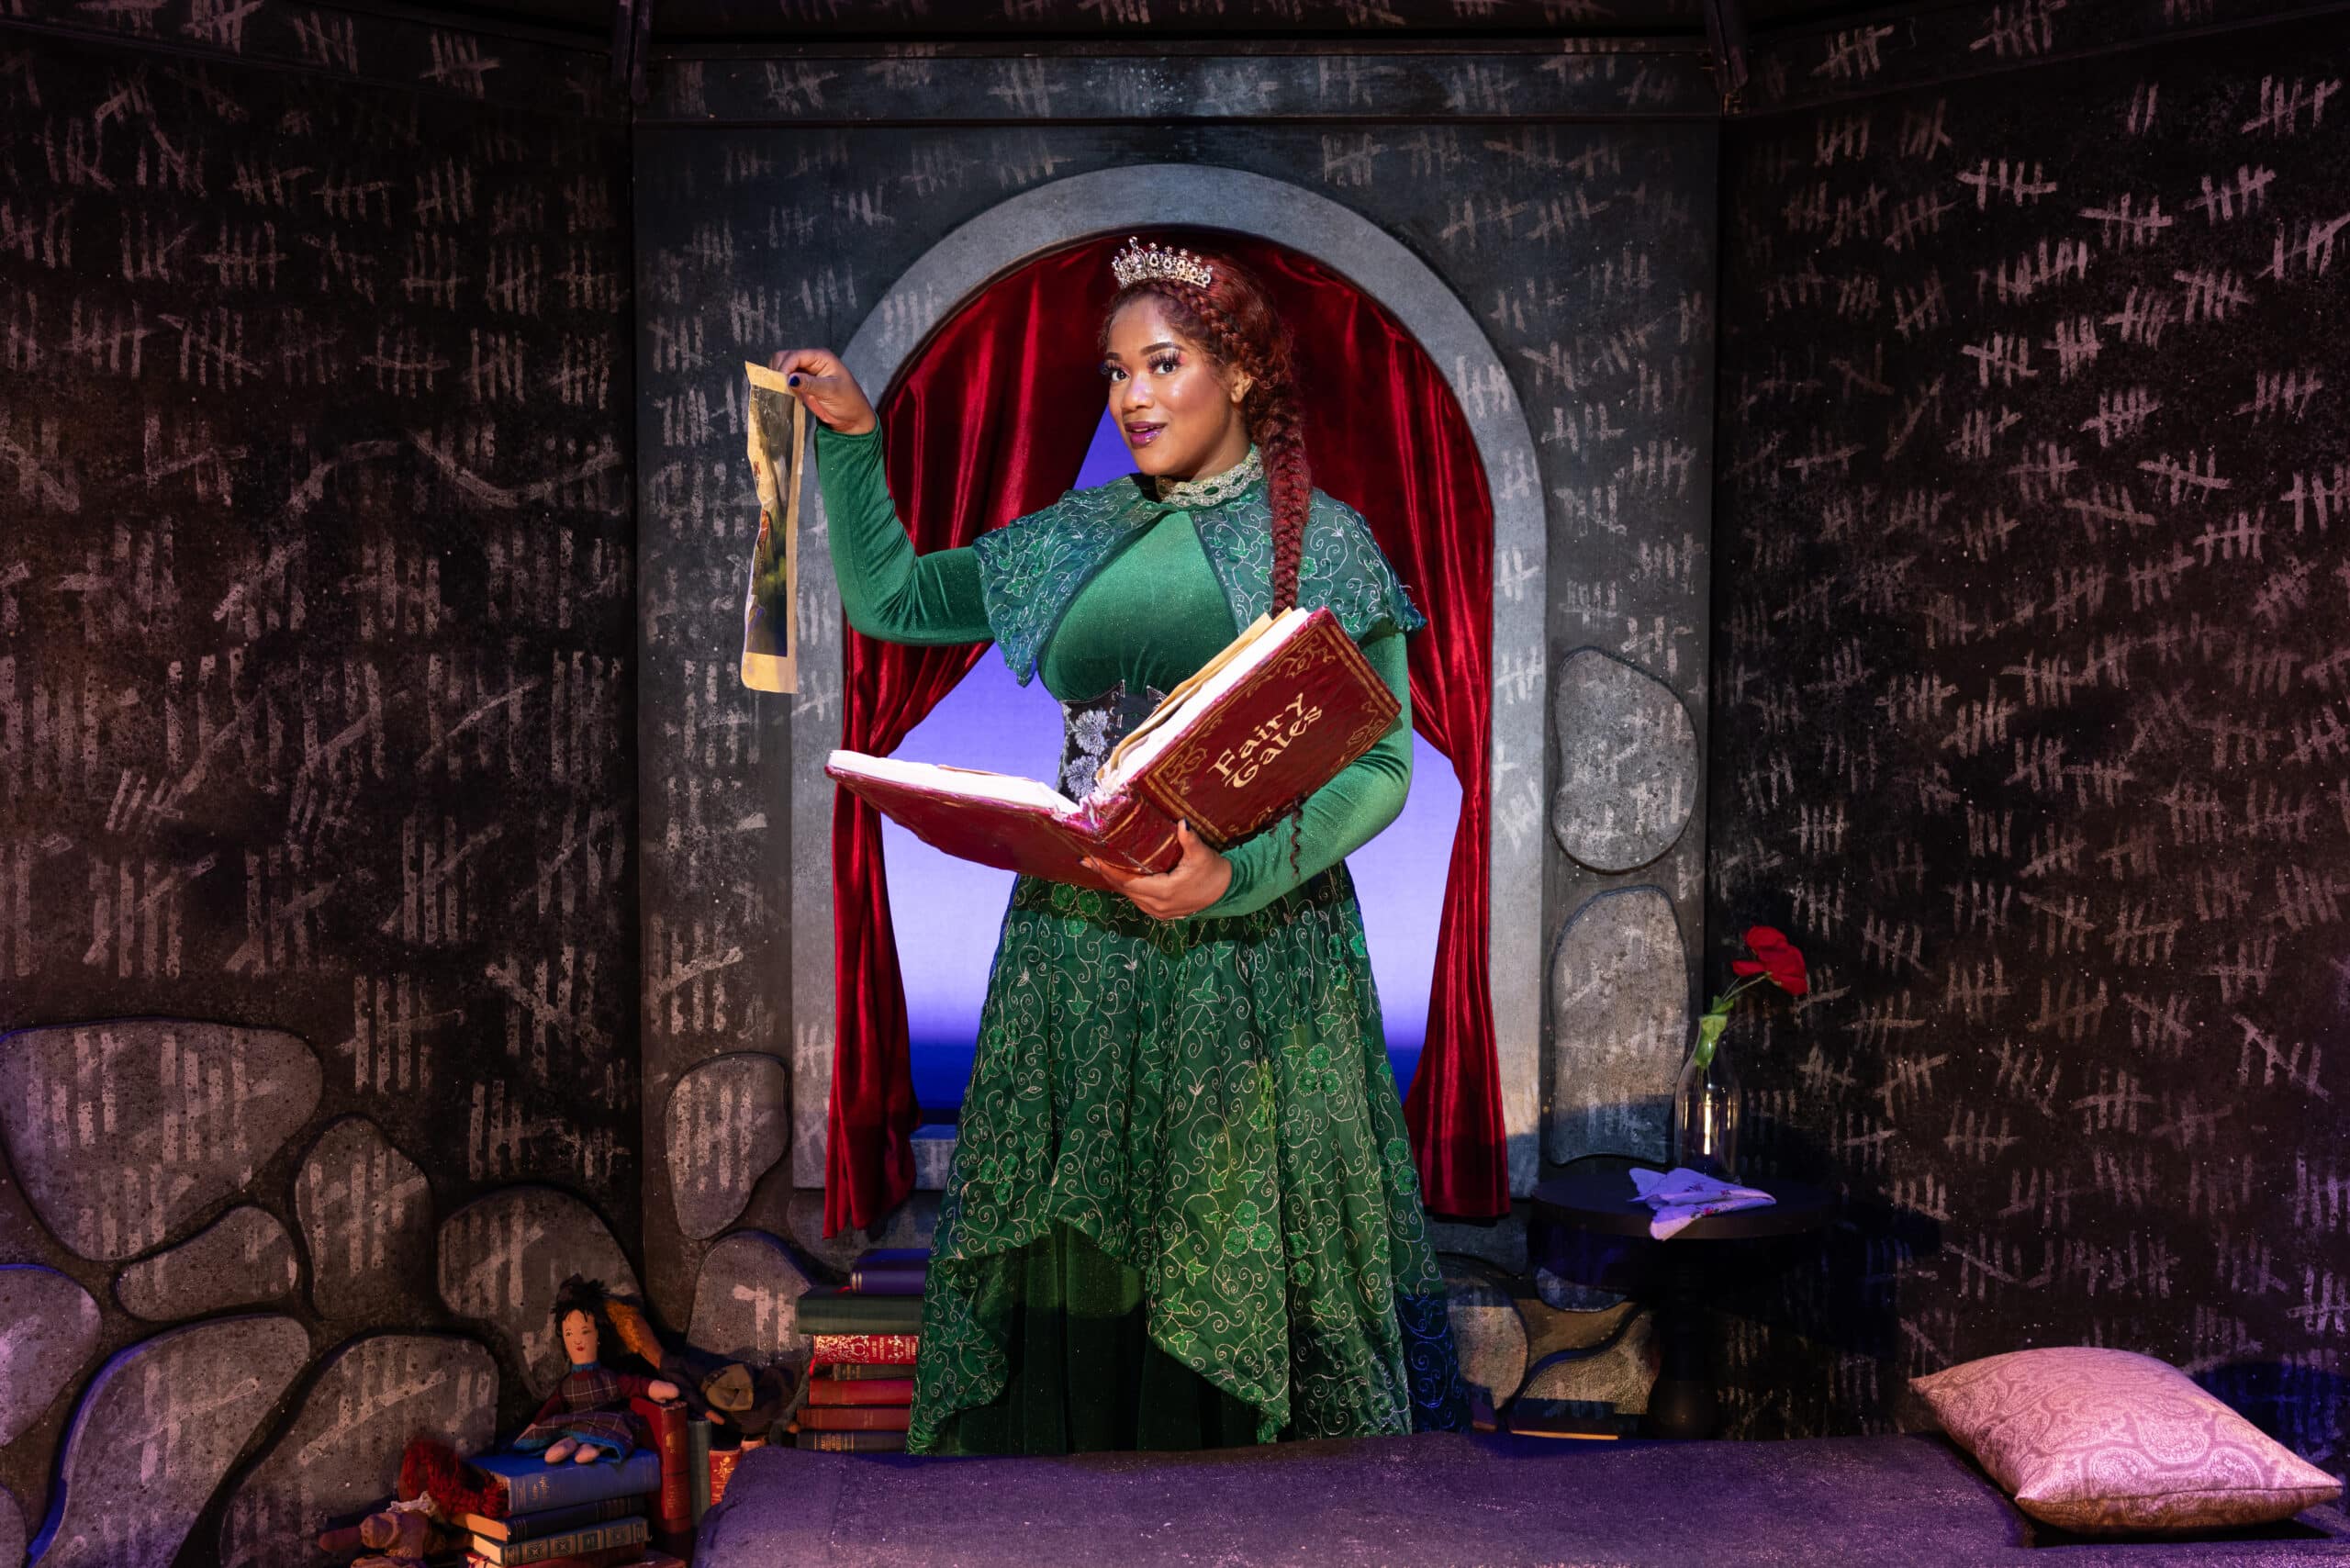 Cecily Dionne Davis as Fiona in Shrek The Musical (Credit cyorkphoto)